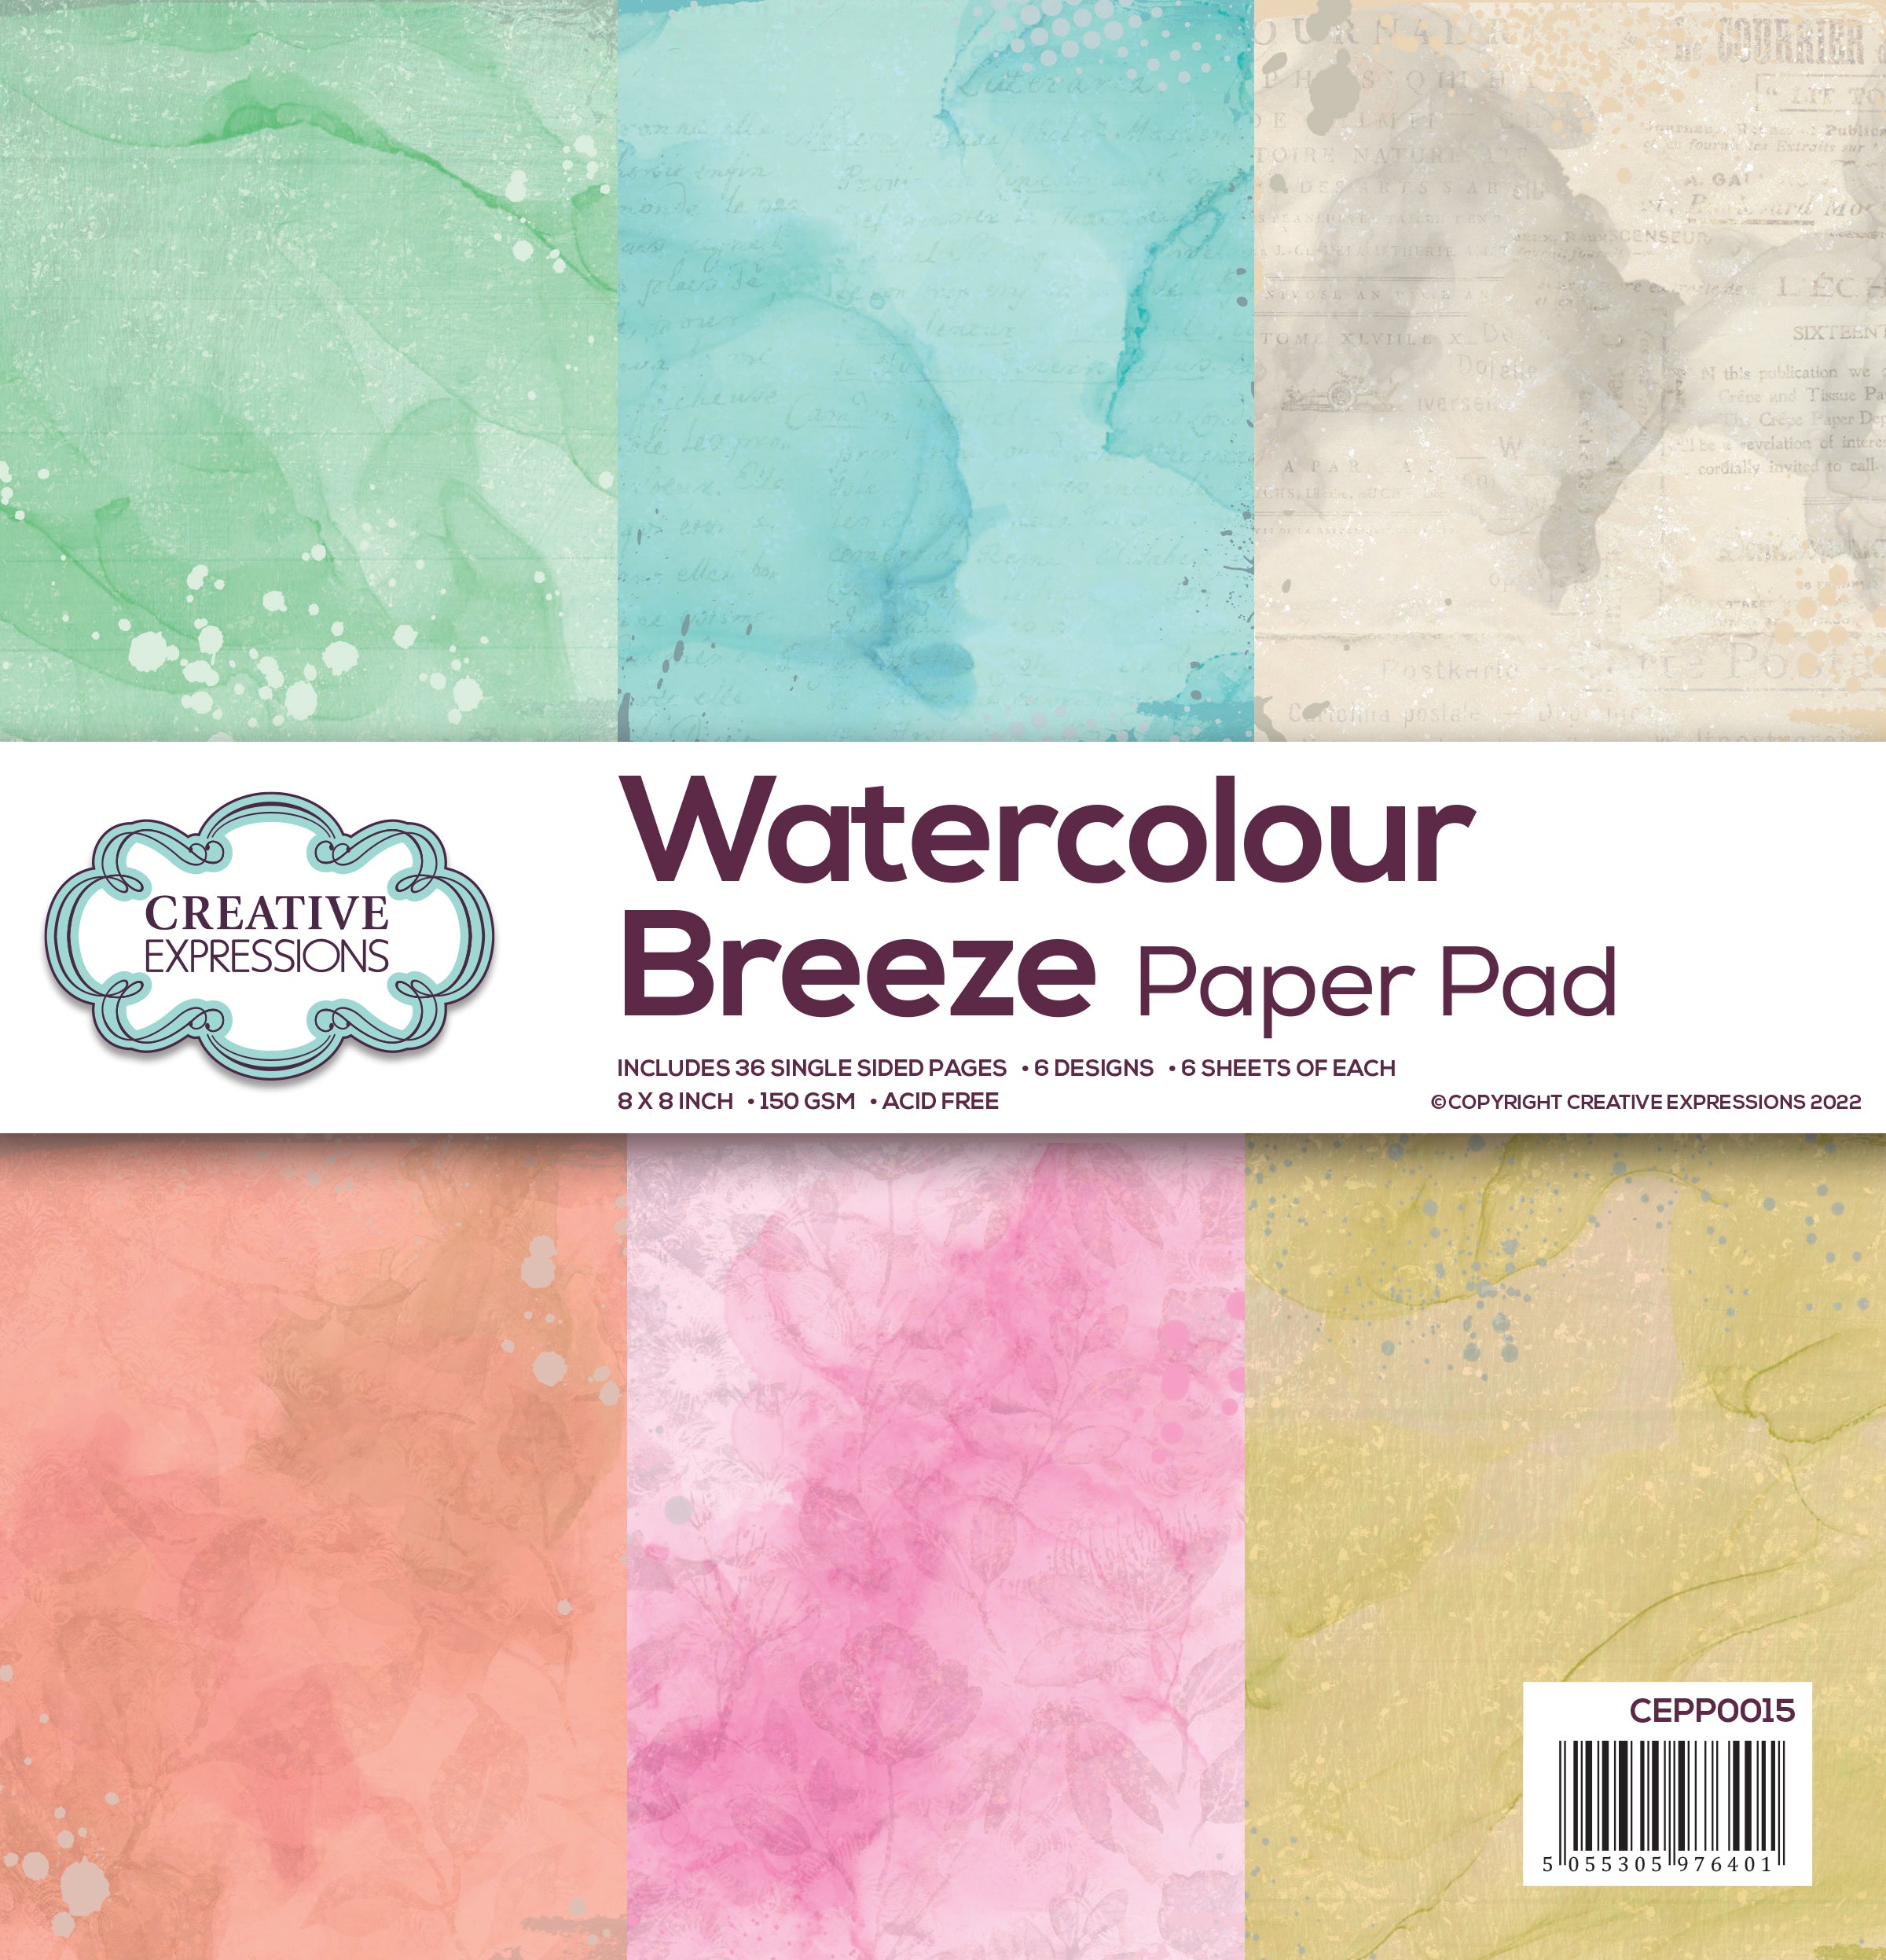 Creative Expressions Watercolour Breeze 8 in x 8 in Paper Pad